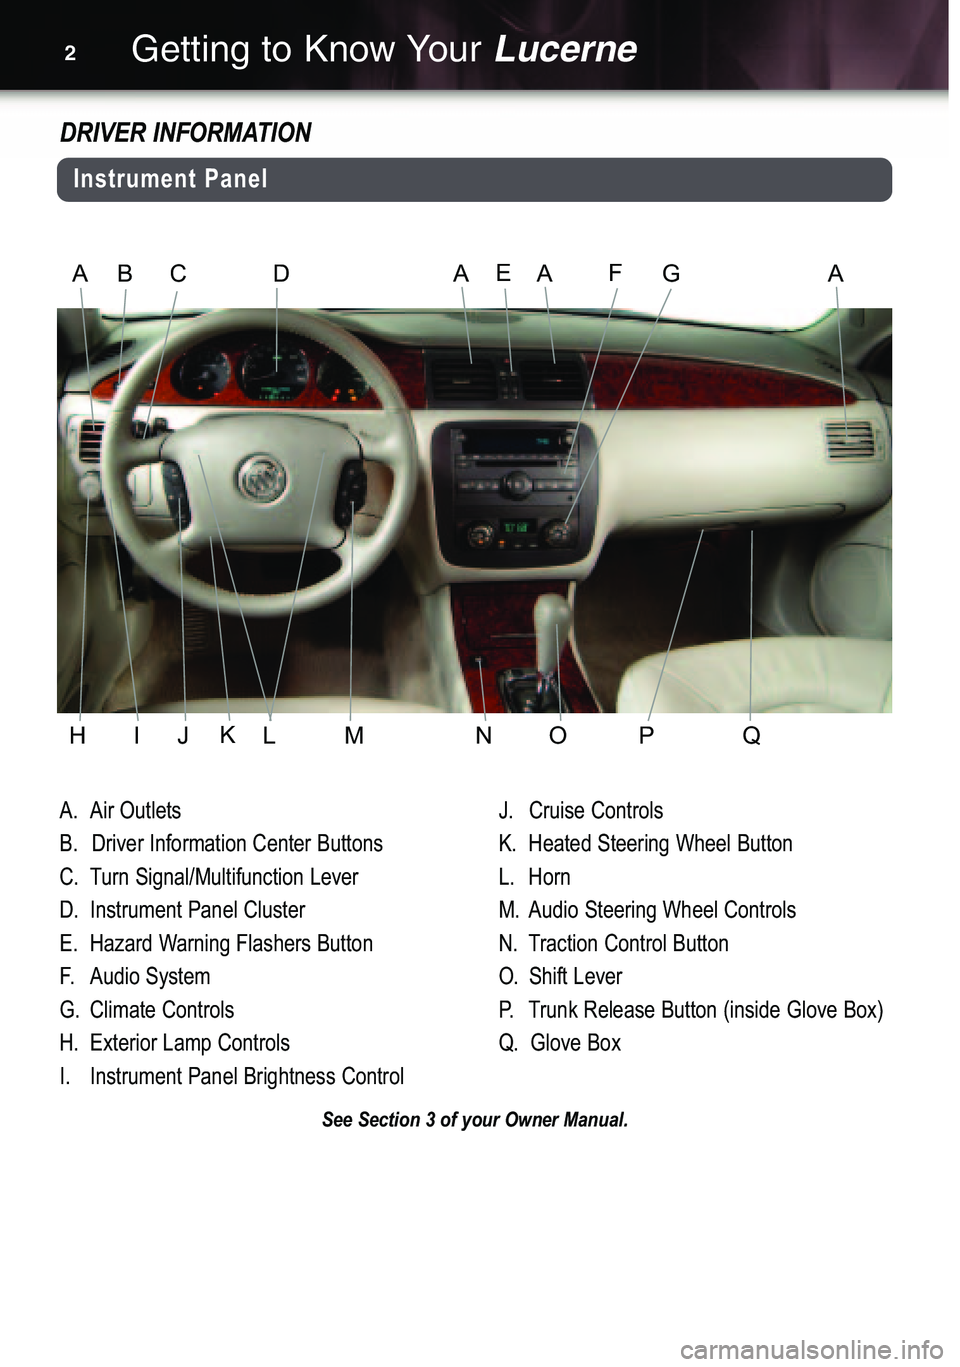 BUICK LUCERNE 2007  Get To Know Guide Getting to Know YourLucerne2
A.Air Outlets
B. Driver Information Center Buttons
C. Turn Signal/Multifunction Lever
D. Instrument Panel Cluster
E. Hazard Warning Flashers Button
F.Audio System
G. Clima